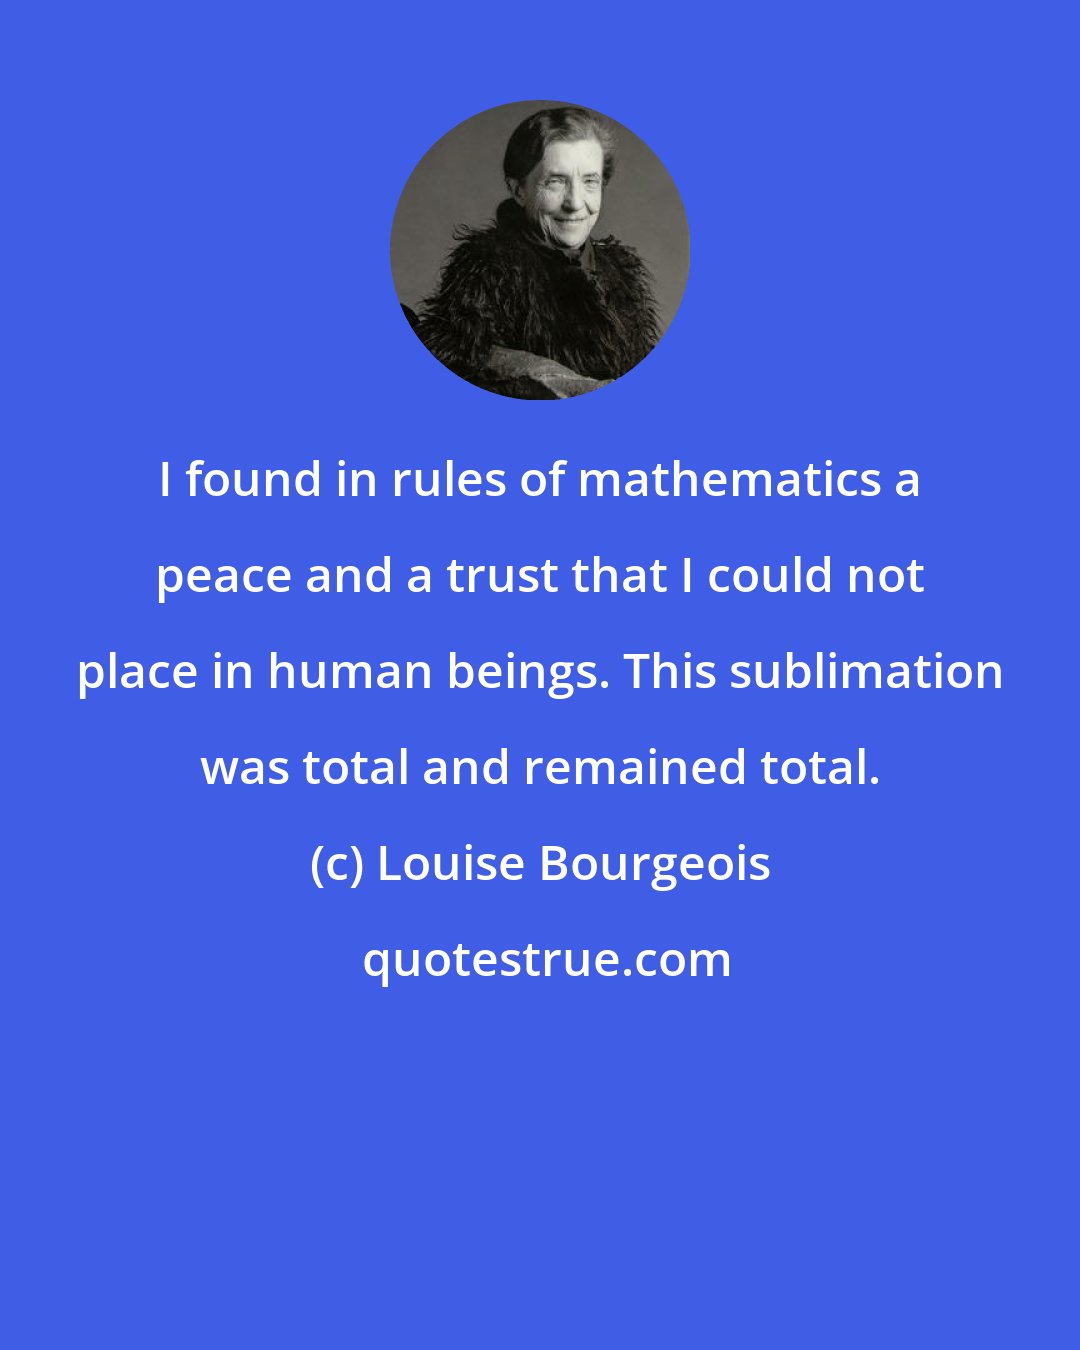 Louise Bourgeois: I found in rules of mathematics a peace and a trust that I could not place in human beings. This sublimation was total and remained total.